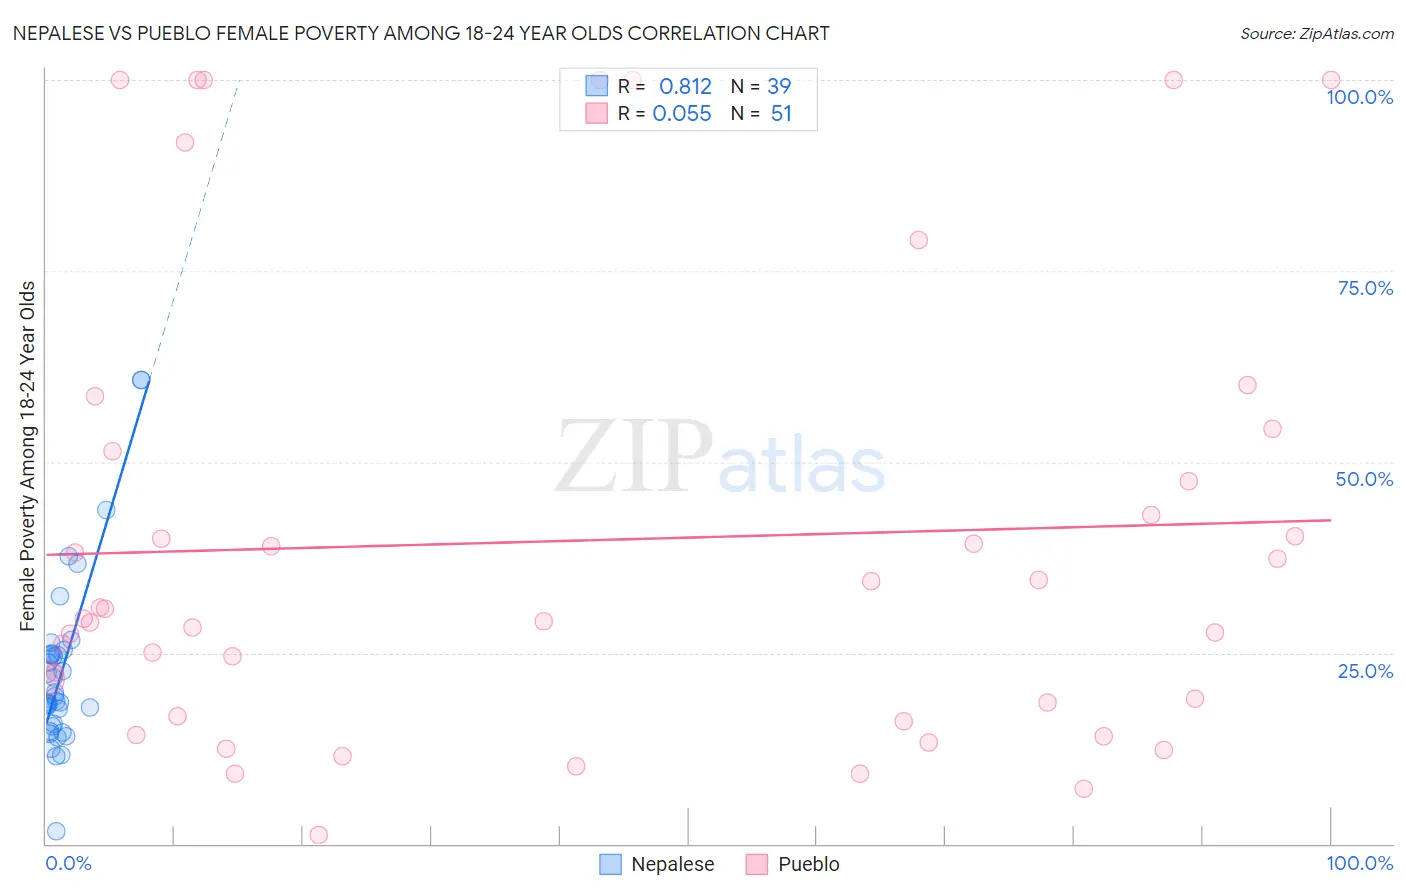 Nepalese vs Pueblo Female Poverty Among 18-24 Year Olds